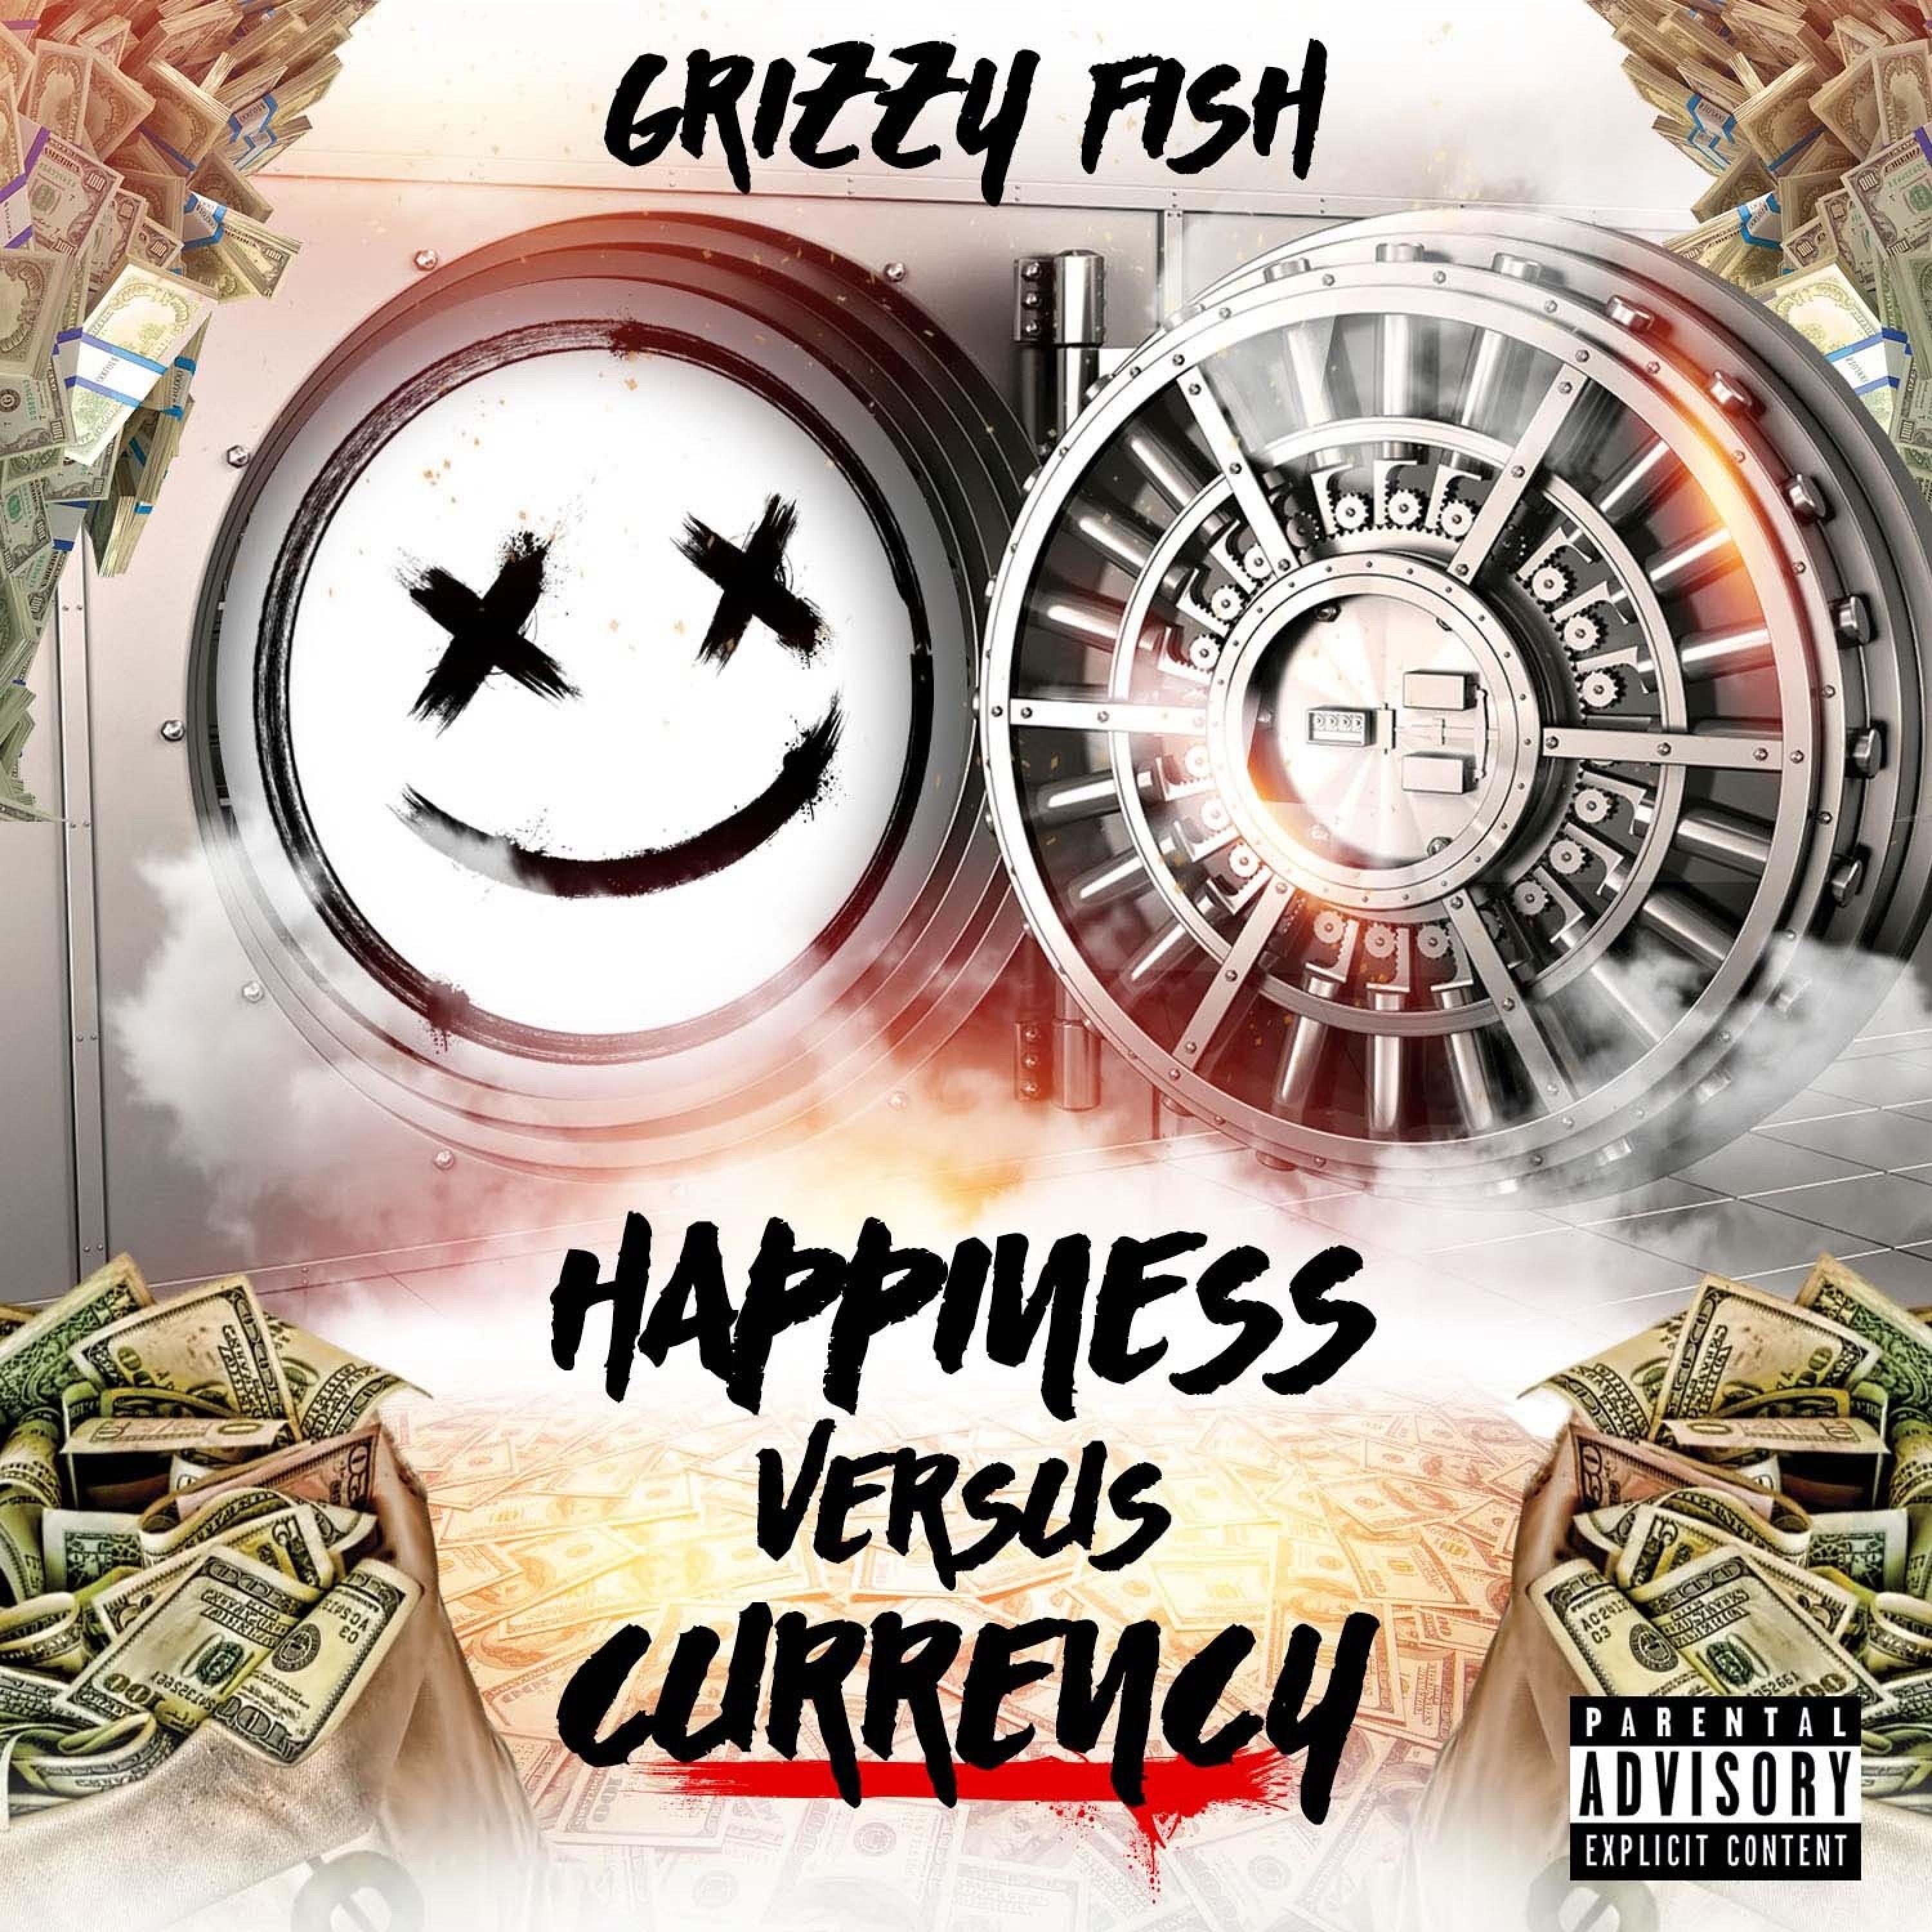 Grizzy Fish - Currency A Bliss (feat. Baby Hustla & Ellie)